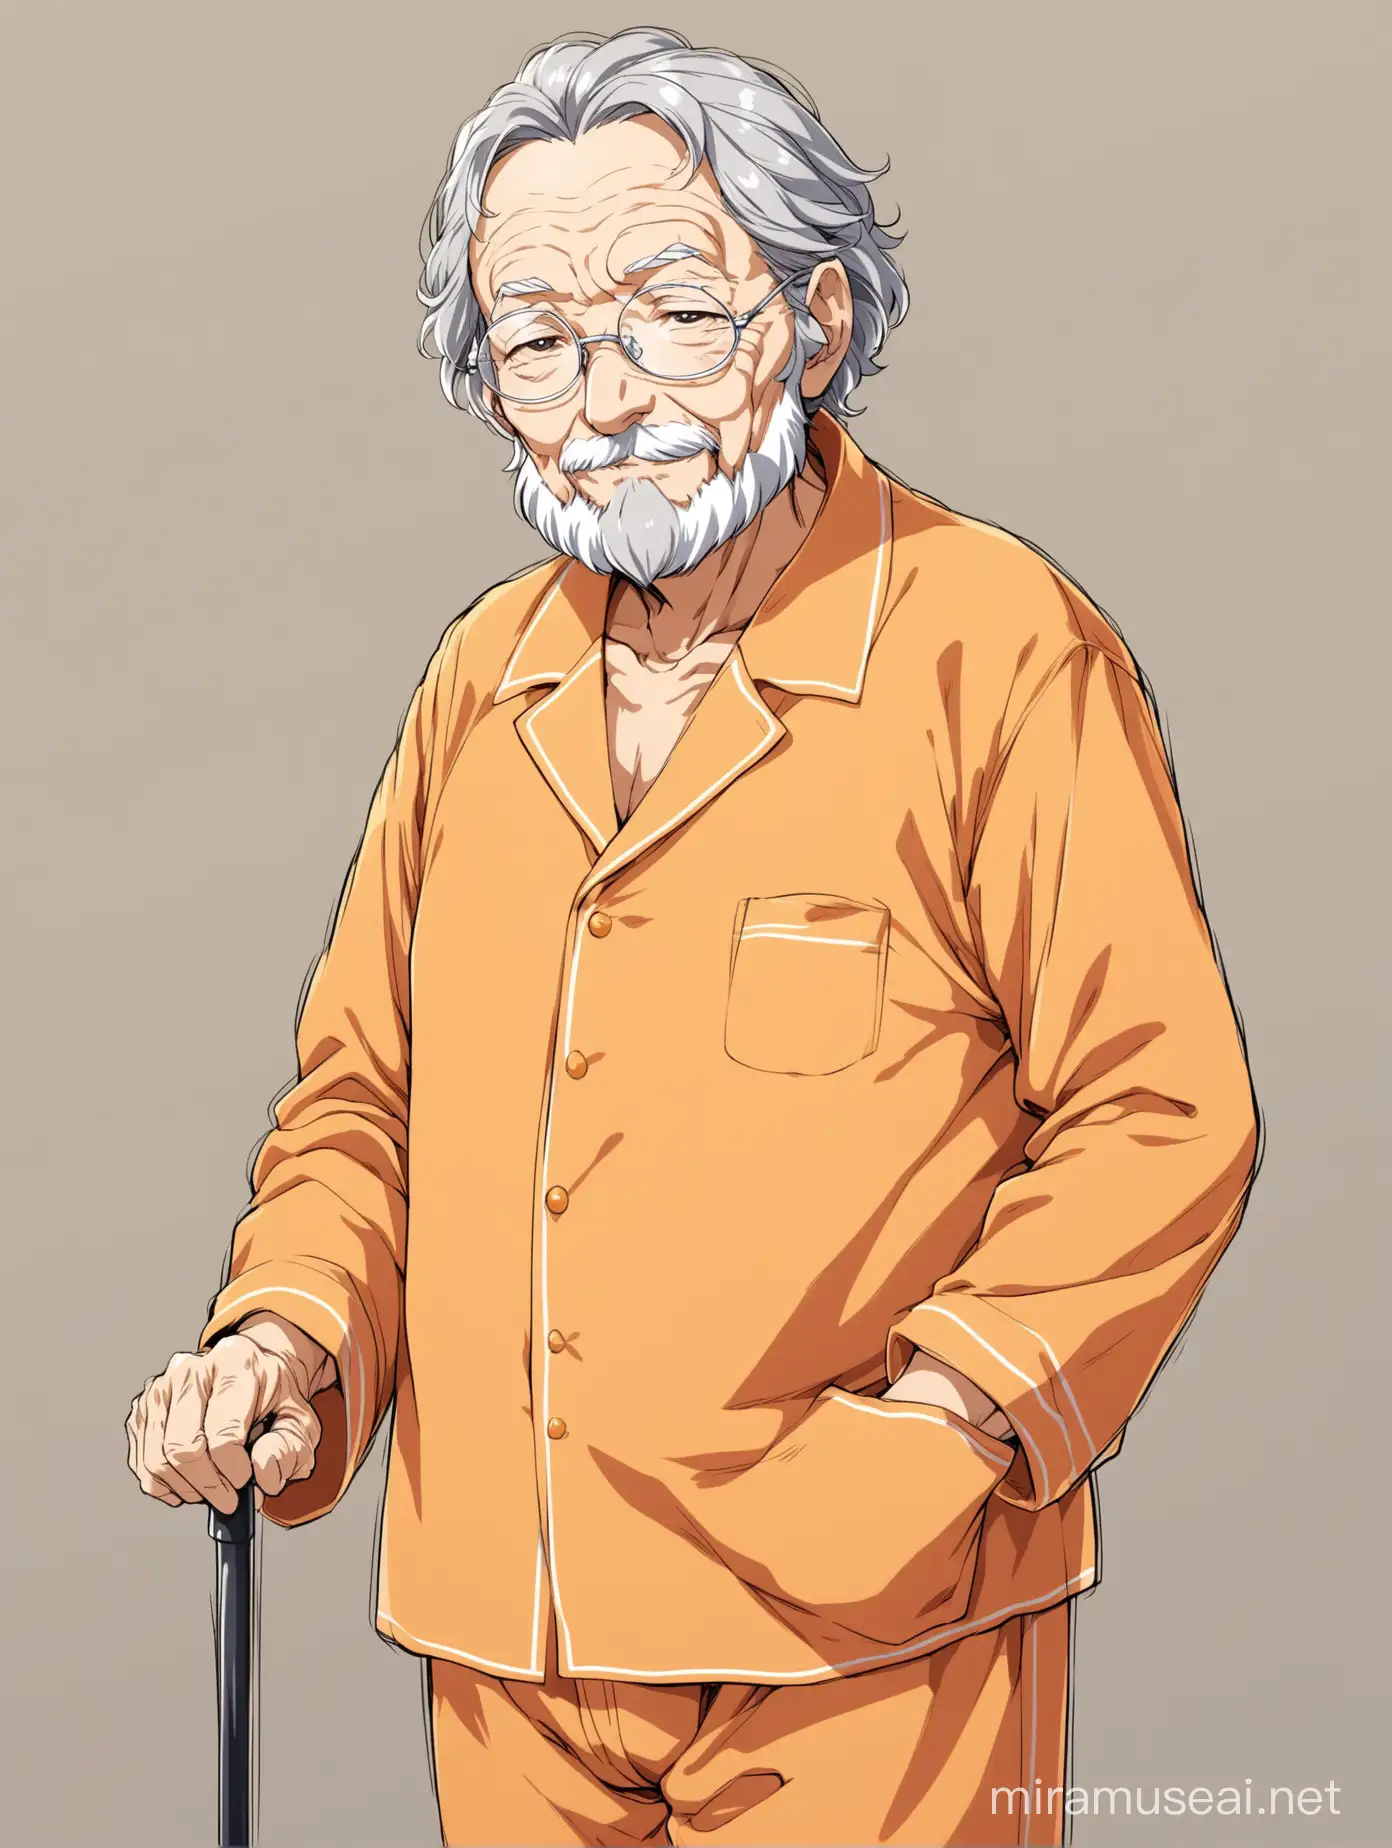 Anime, Old wrinkled man, with wavy gray hair, wearing light orange pajamas, wearing silver glasses, wise, friendly, with cane.